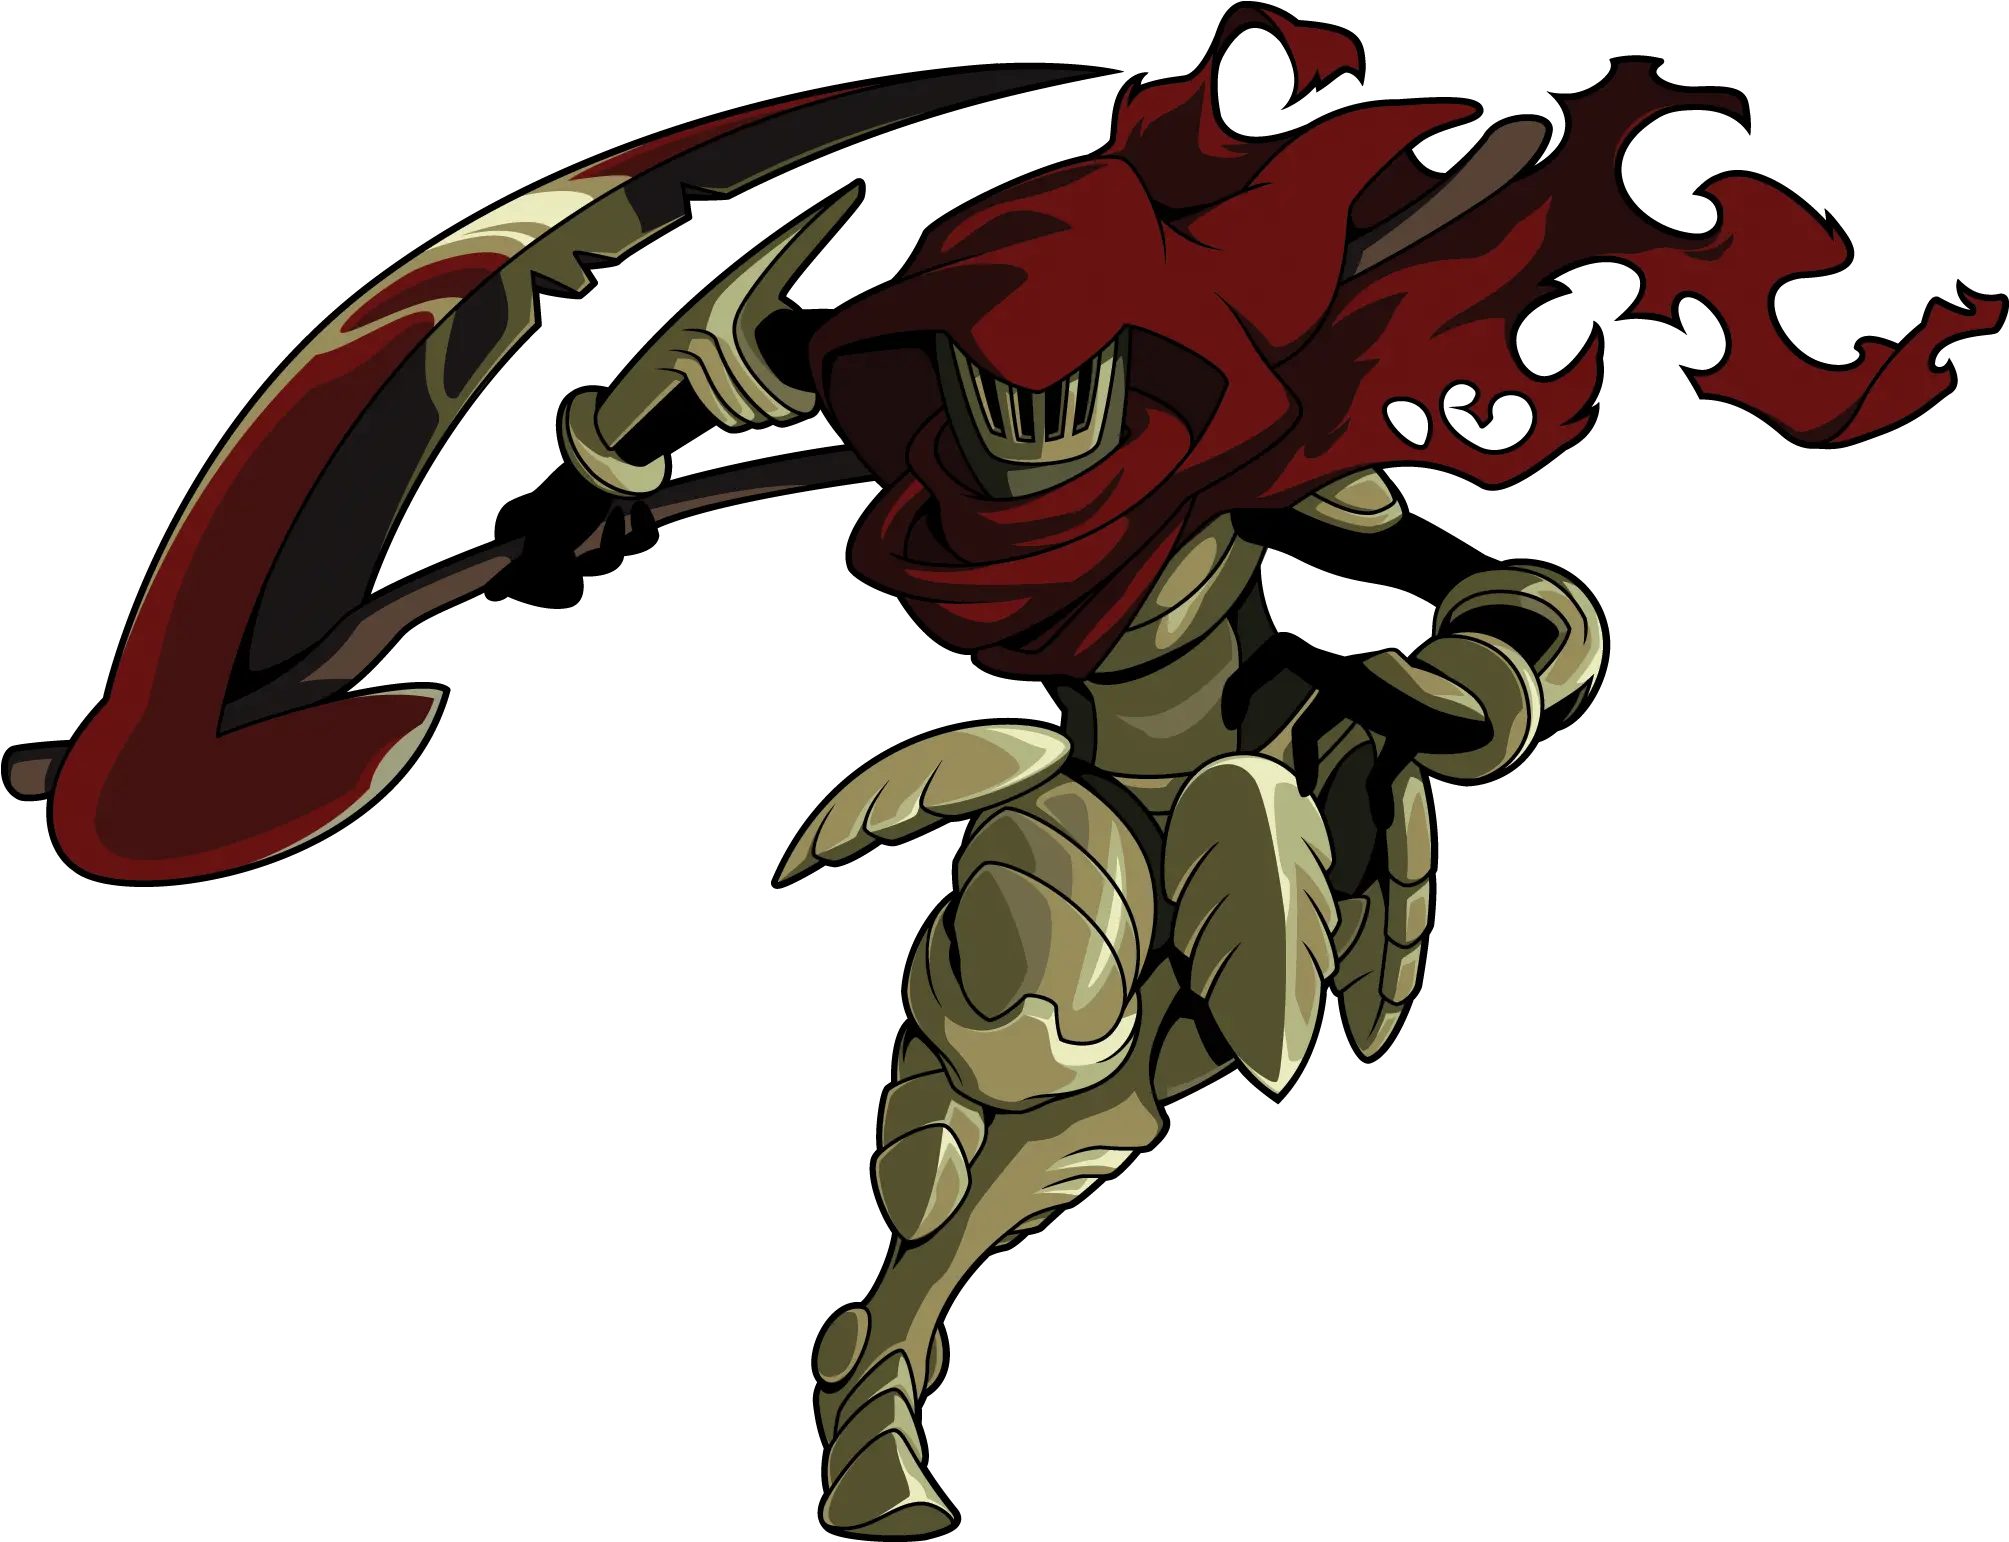 Download Logos Icons Shovel Knight Specter Of Torment Specter Knight From Shovel Knight Png Shovel Transparent Background